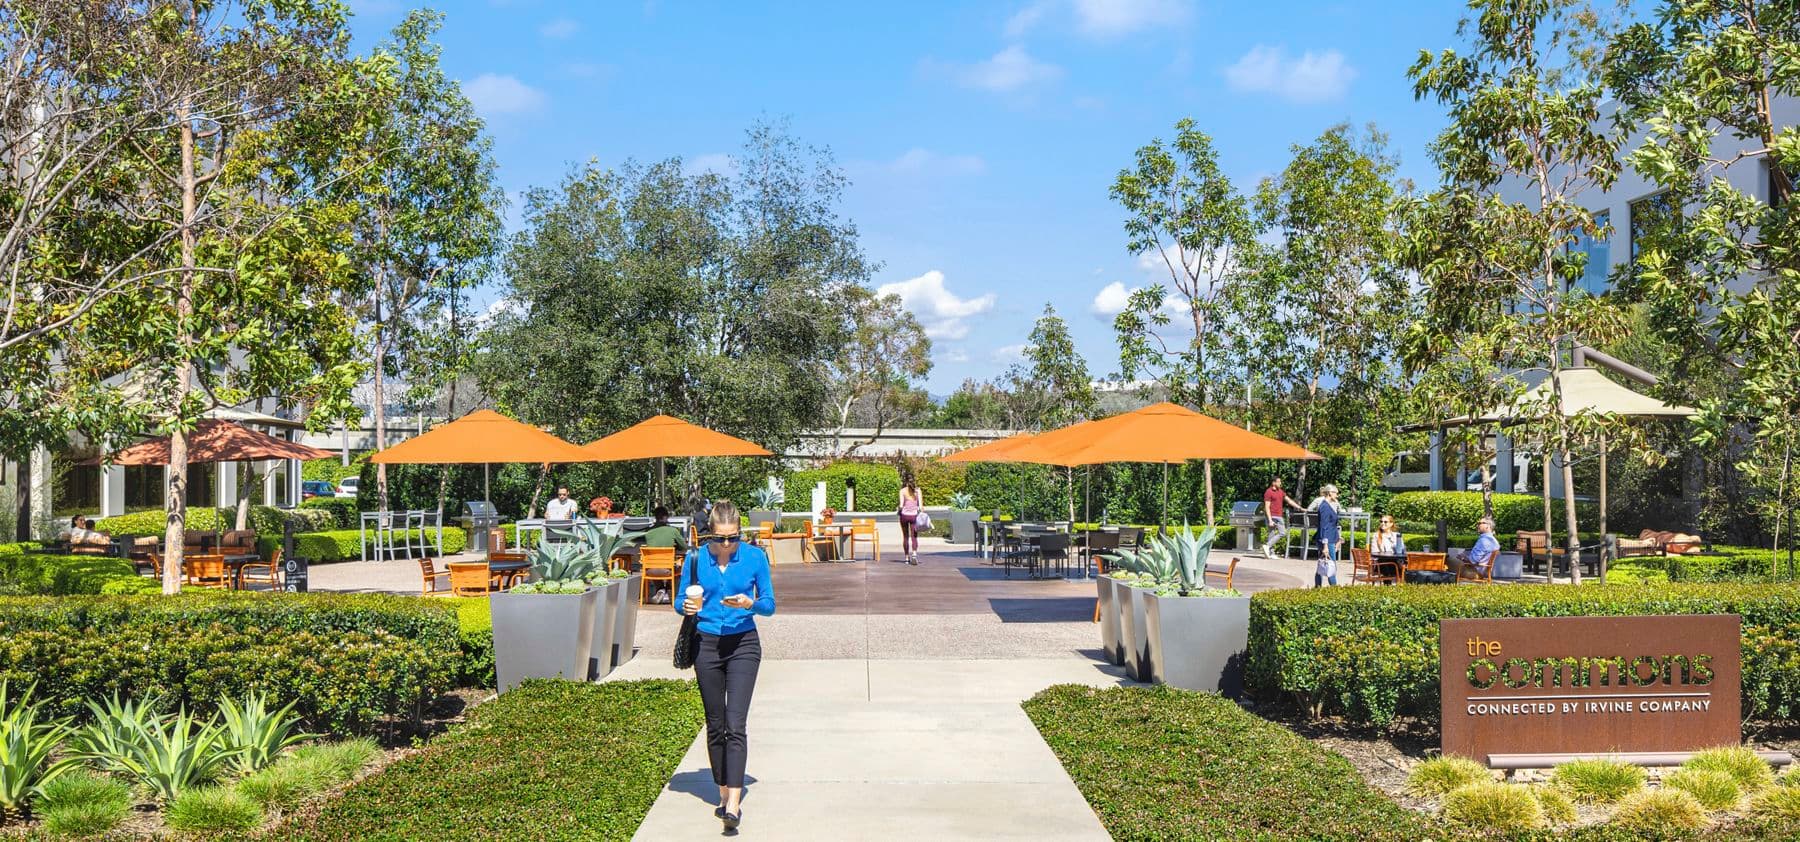 View of The Commons Outdoor Workspace at Irvine Business Center in Irvine, CA.